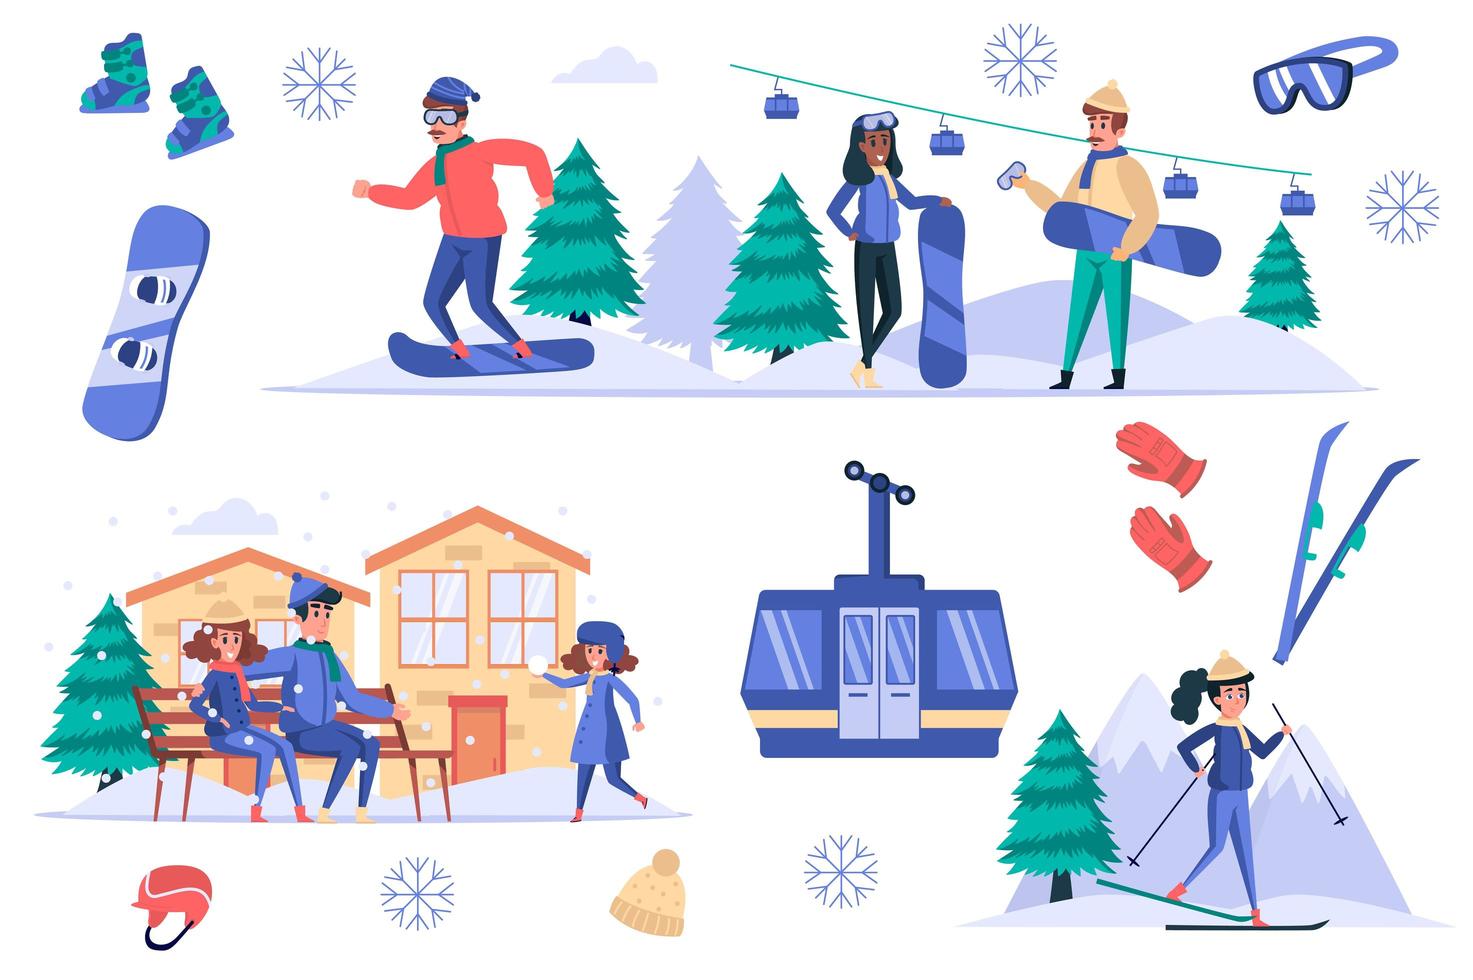 Ski resort isolated elements set. Bundle of people rest in mountains in winter, skiing, snowboarding, funicular, family with child in hotel. Creator kit for vector illustration in flat cartoon design